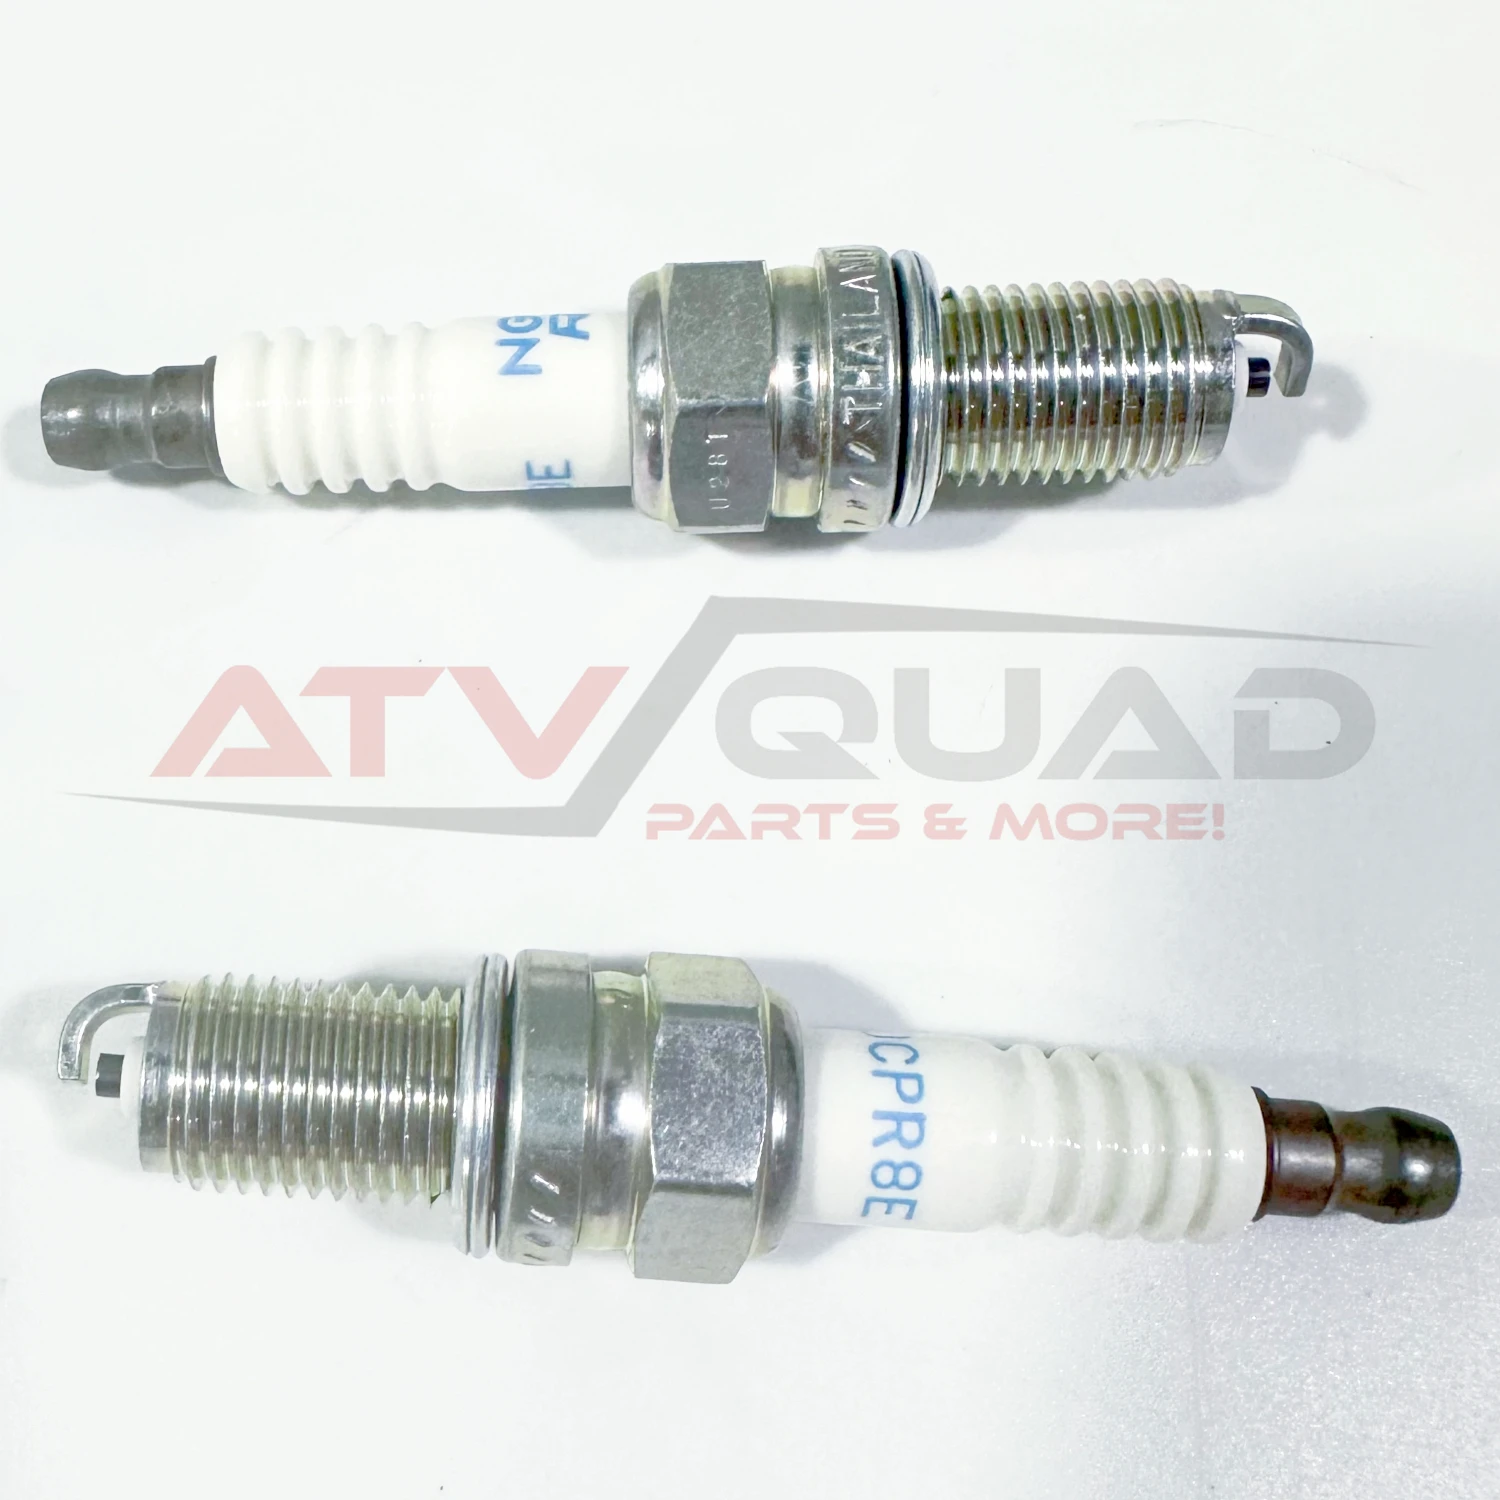 2PCS Spark Plug DCPR8E for BMW F650GS F700GS F800GS F800GT F800R F800S F800ST G650GS Arctic Cat Prowler 700 XT Honda VTX1300C for bmw f800gs f700gs f800r f800s f800gt motorcycle dashboard instrument panel screen protector cover stickers transparent